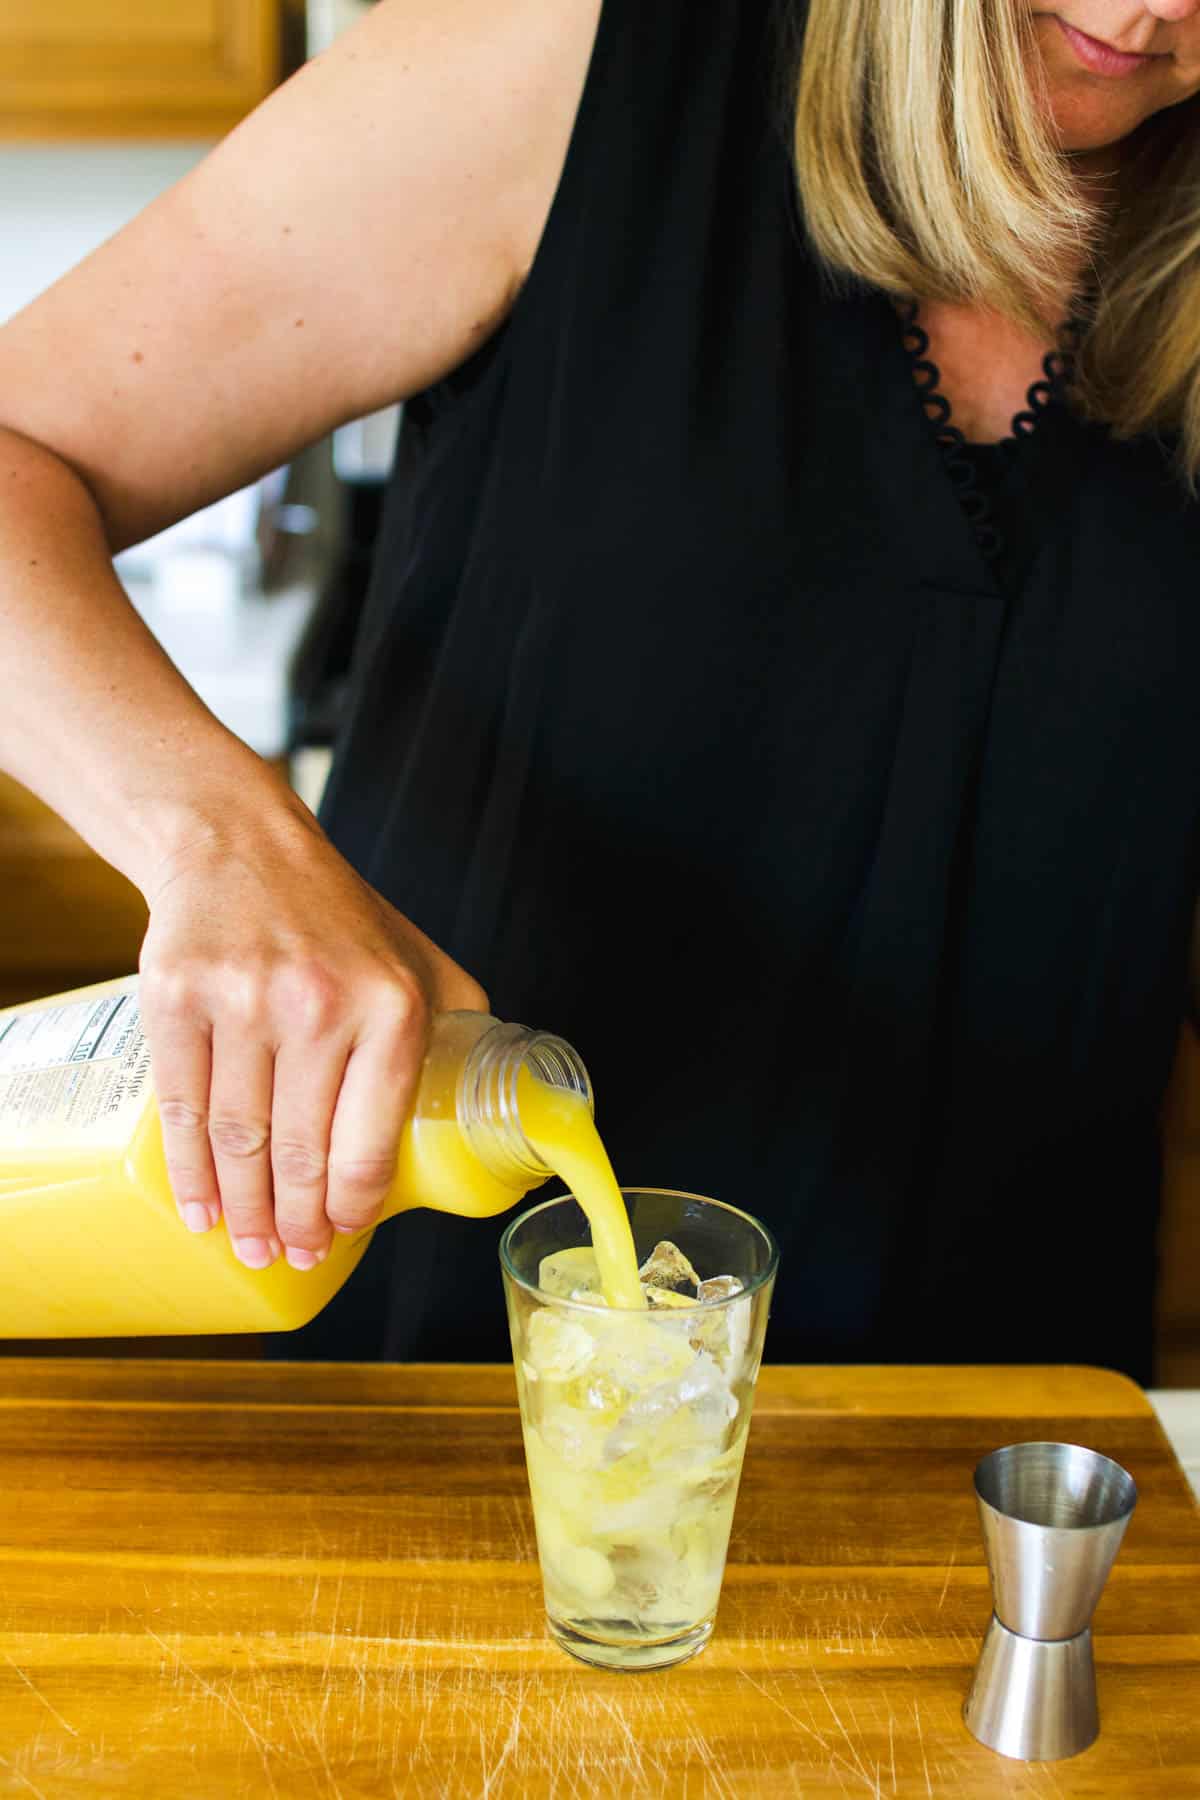 Woman pouring orange juice into a glass full of ice and vodka.